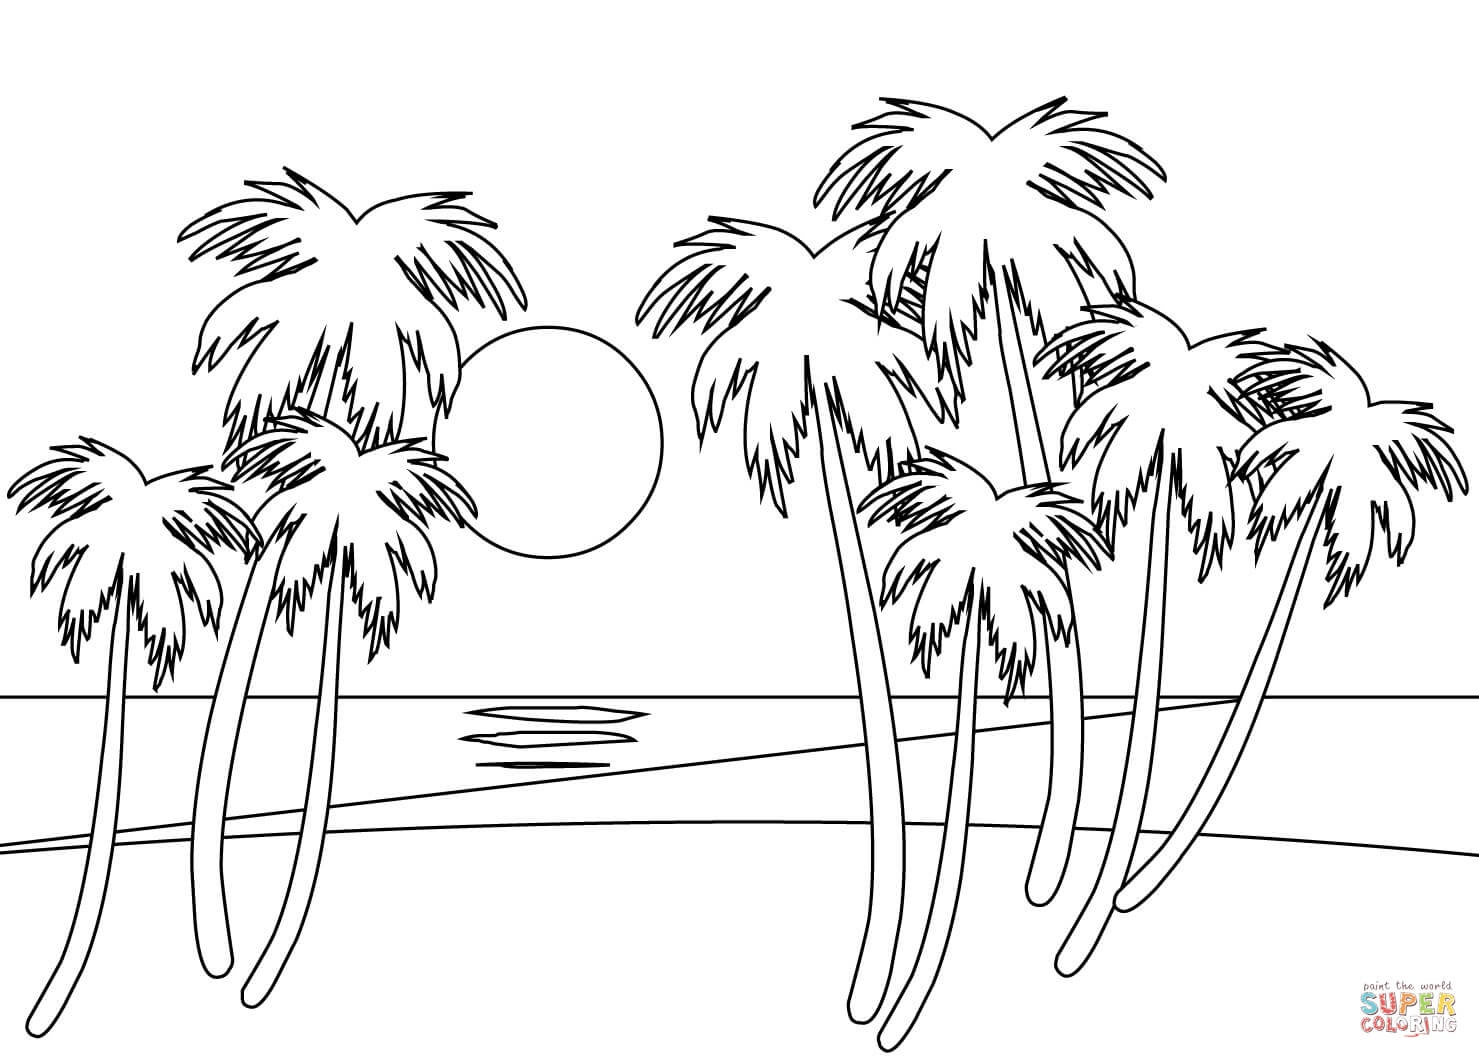 Tropical Beach Coloring Page | Free Printable Coloring Pages - Free Printable Beach Coloring Pages